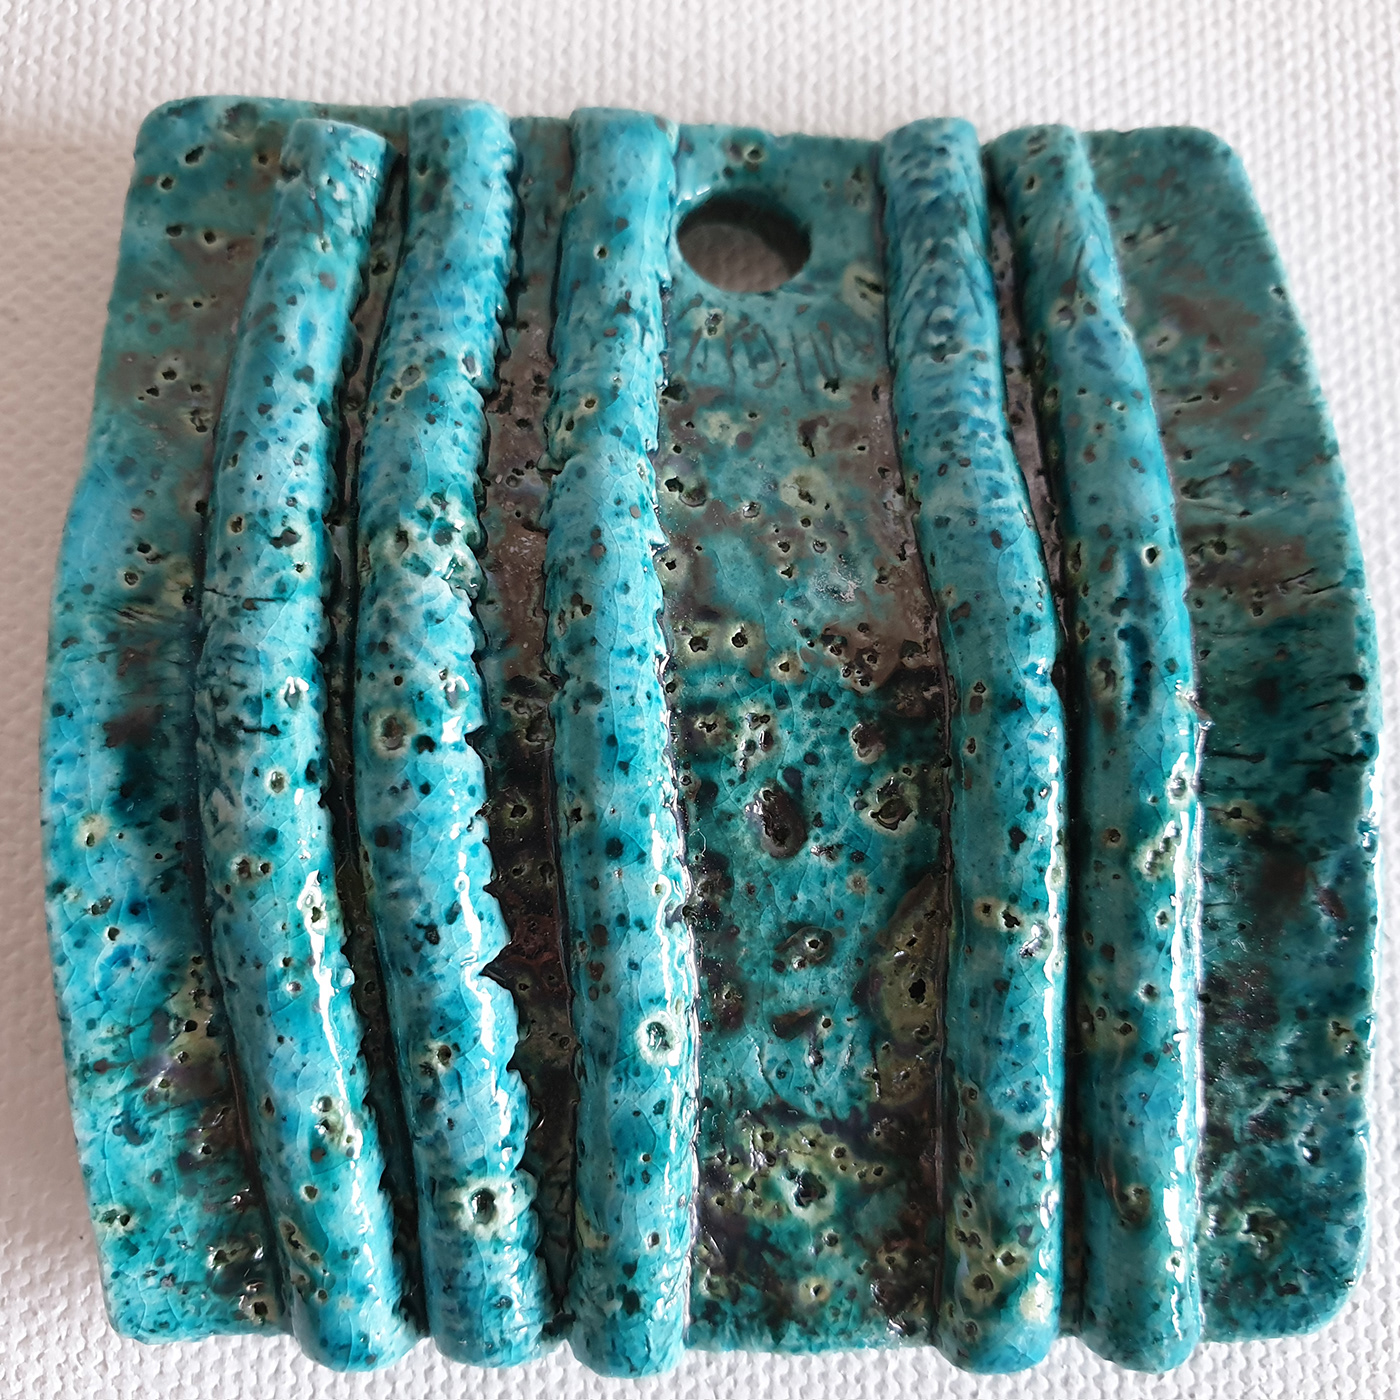 green decorations turquoise abstraction object imagination handwork handicraft play slice